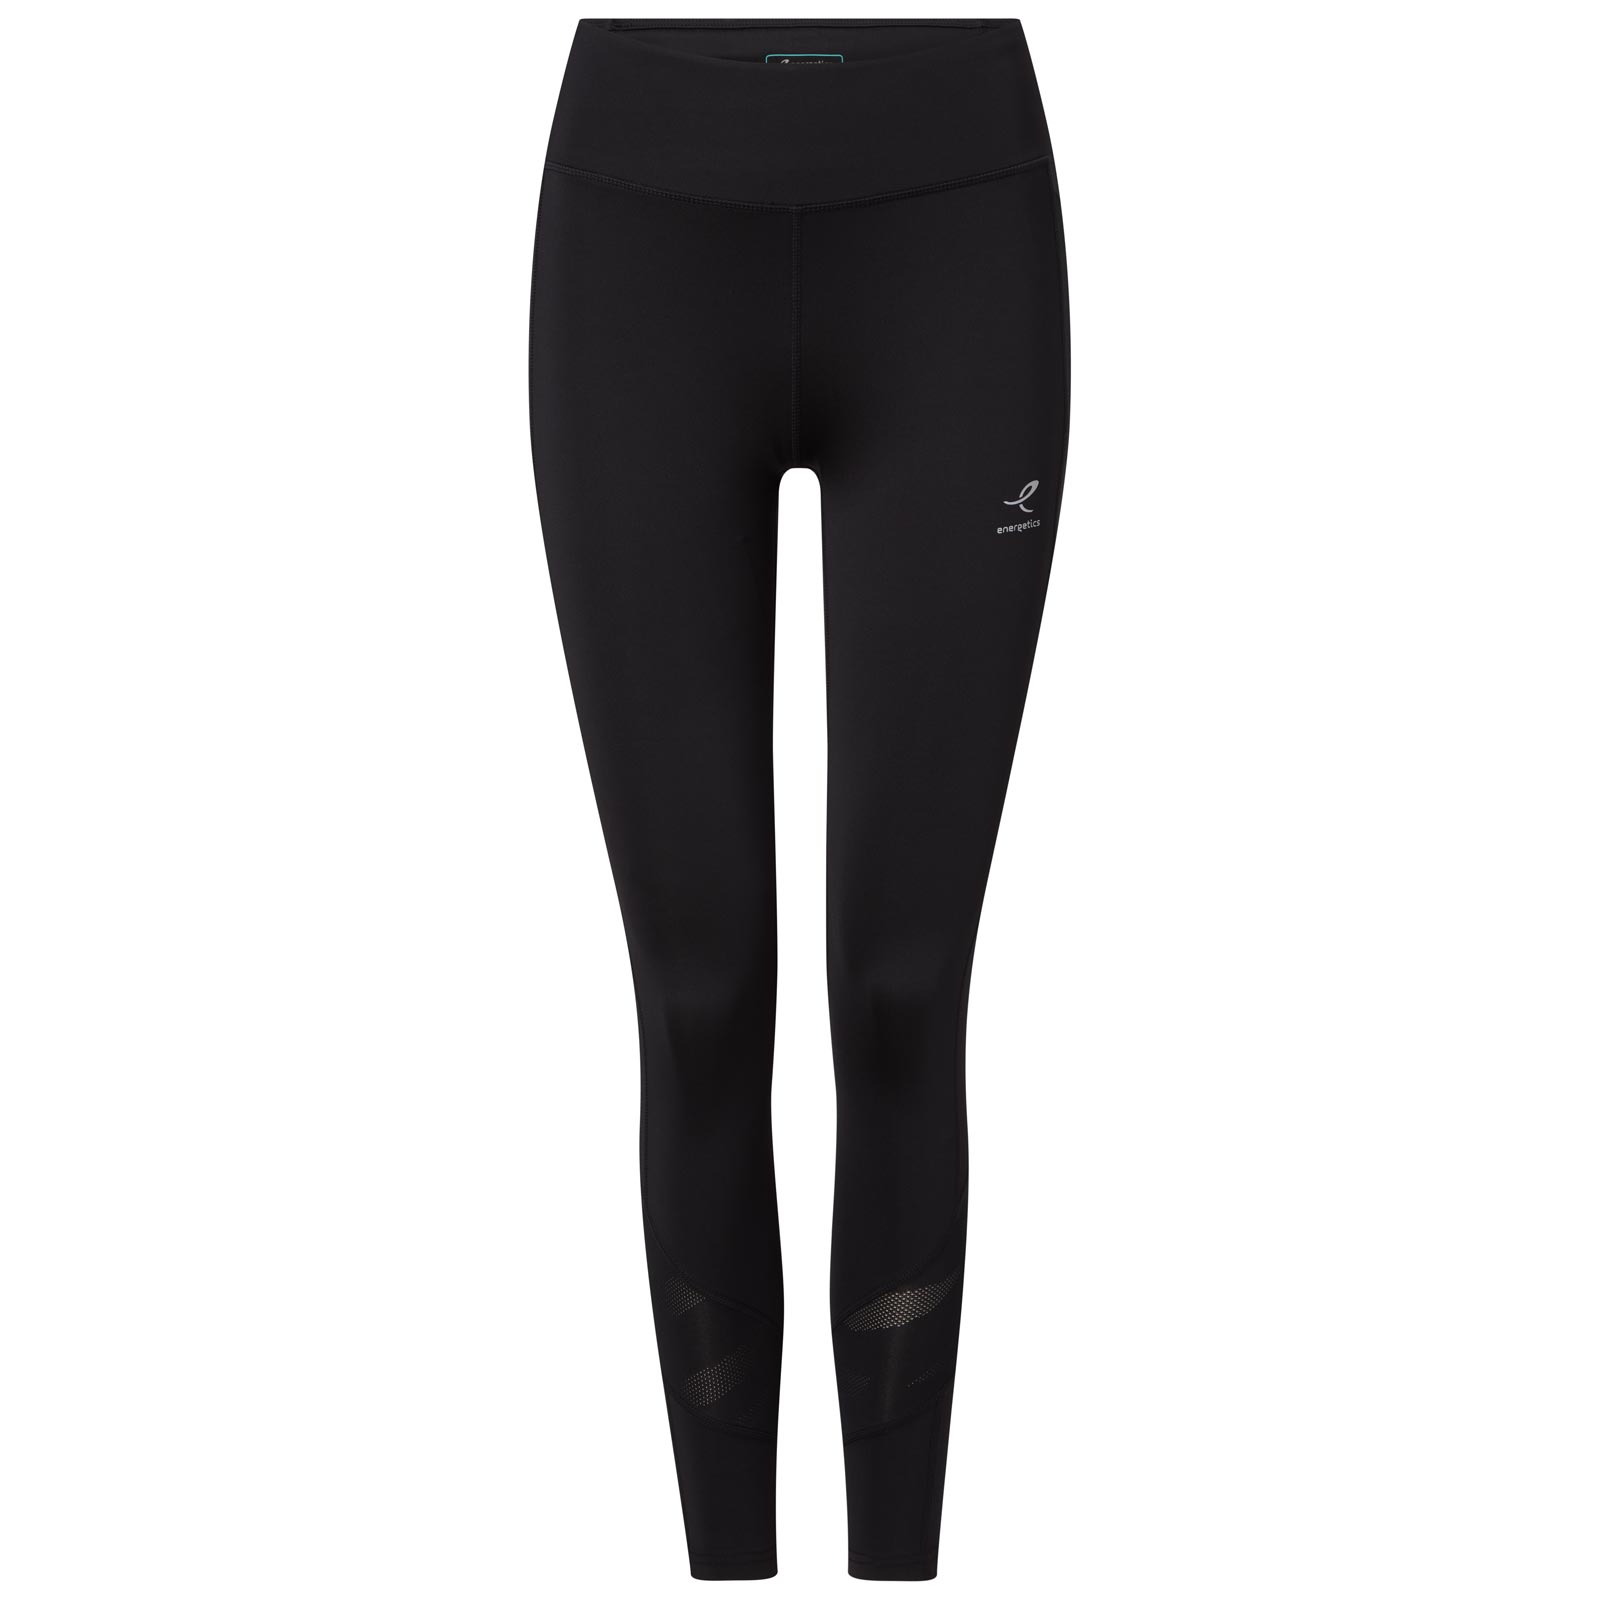 ENERGETICS SERENA 7/8 WOMENS WORKOUT TIGHTS